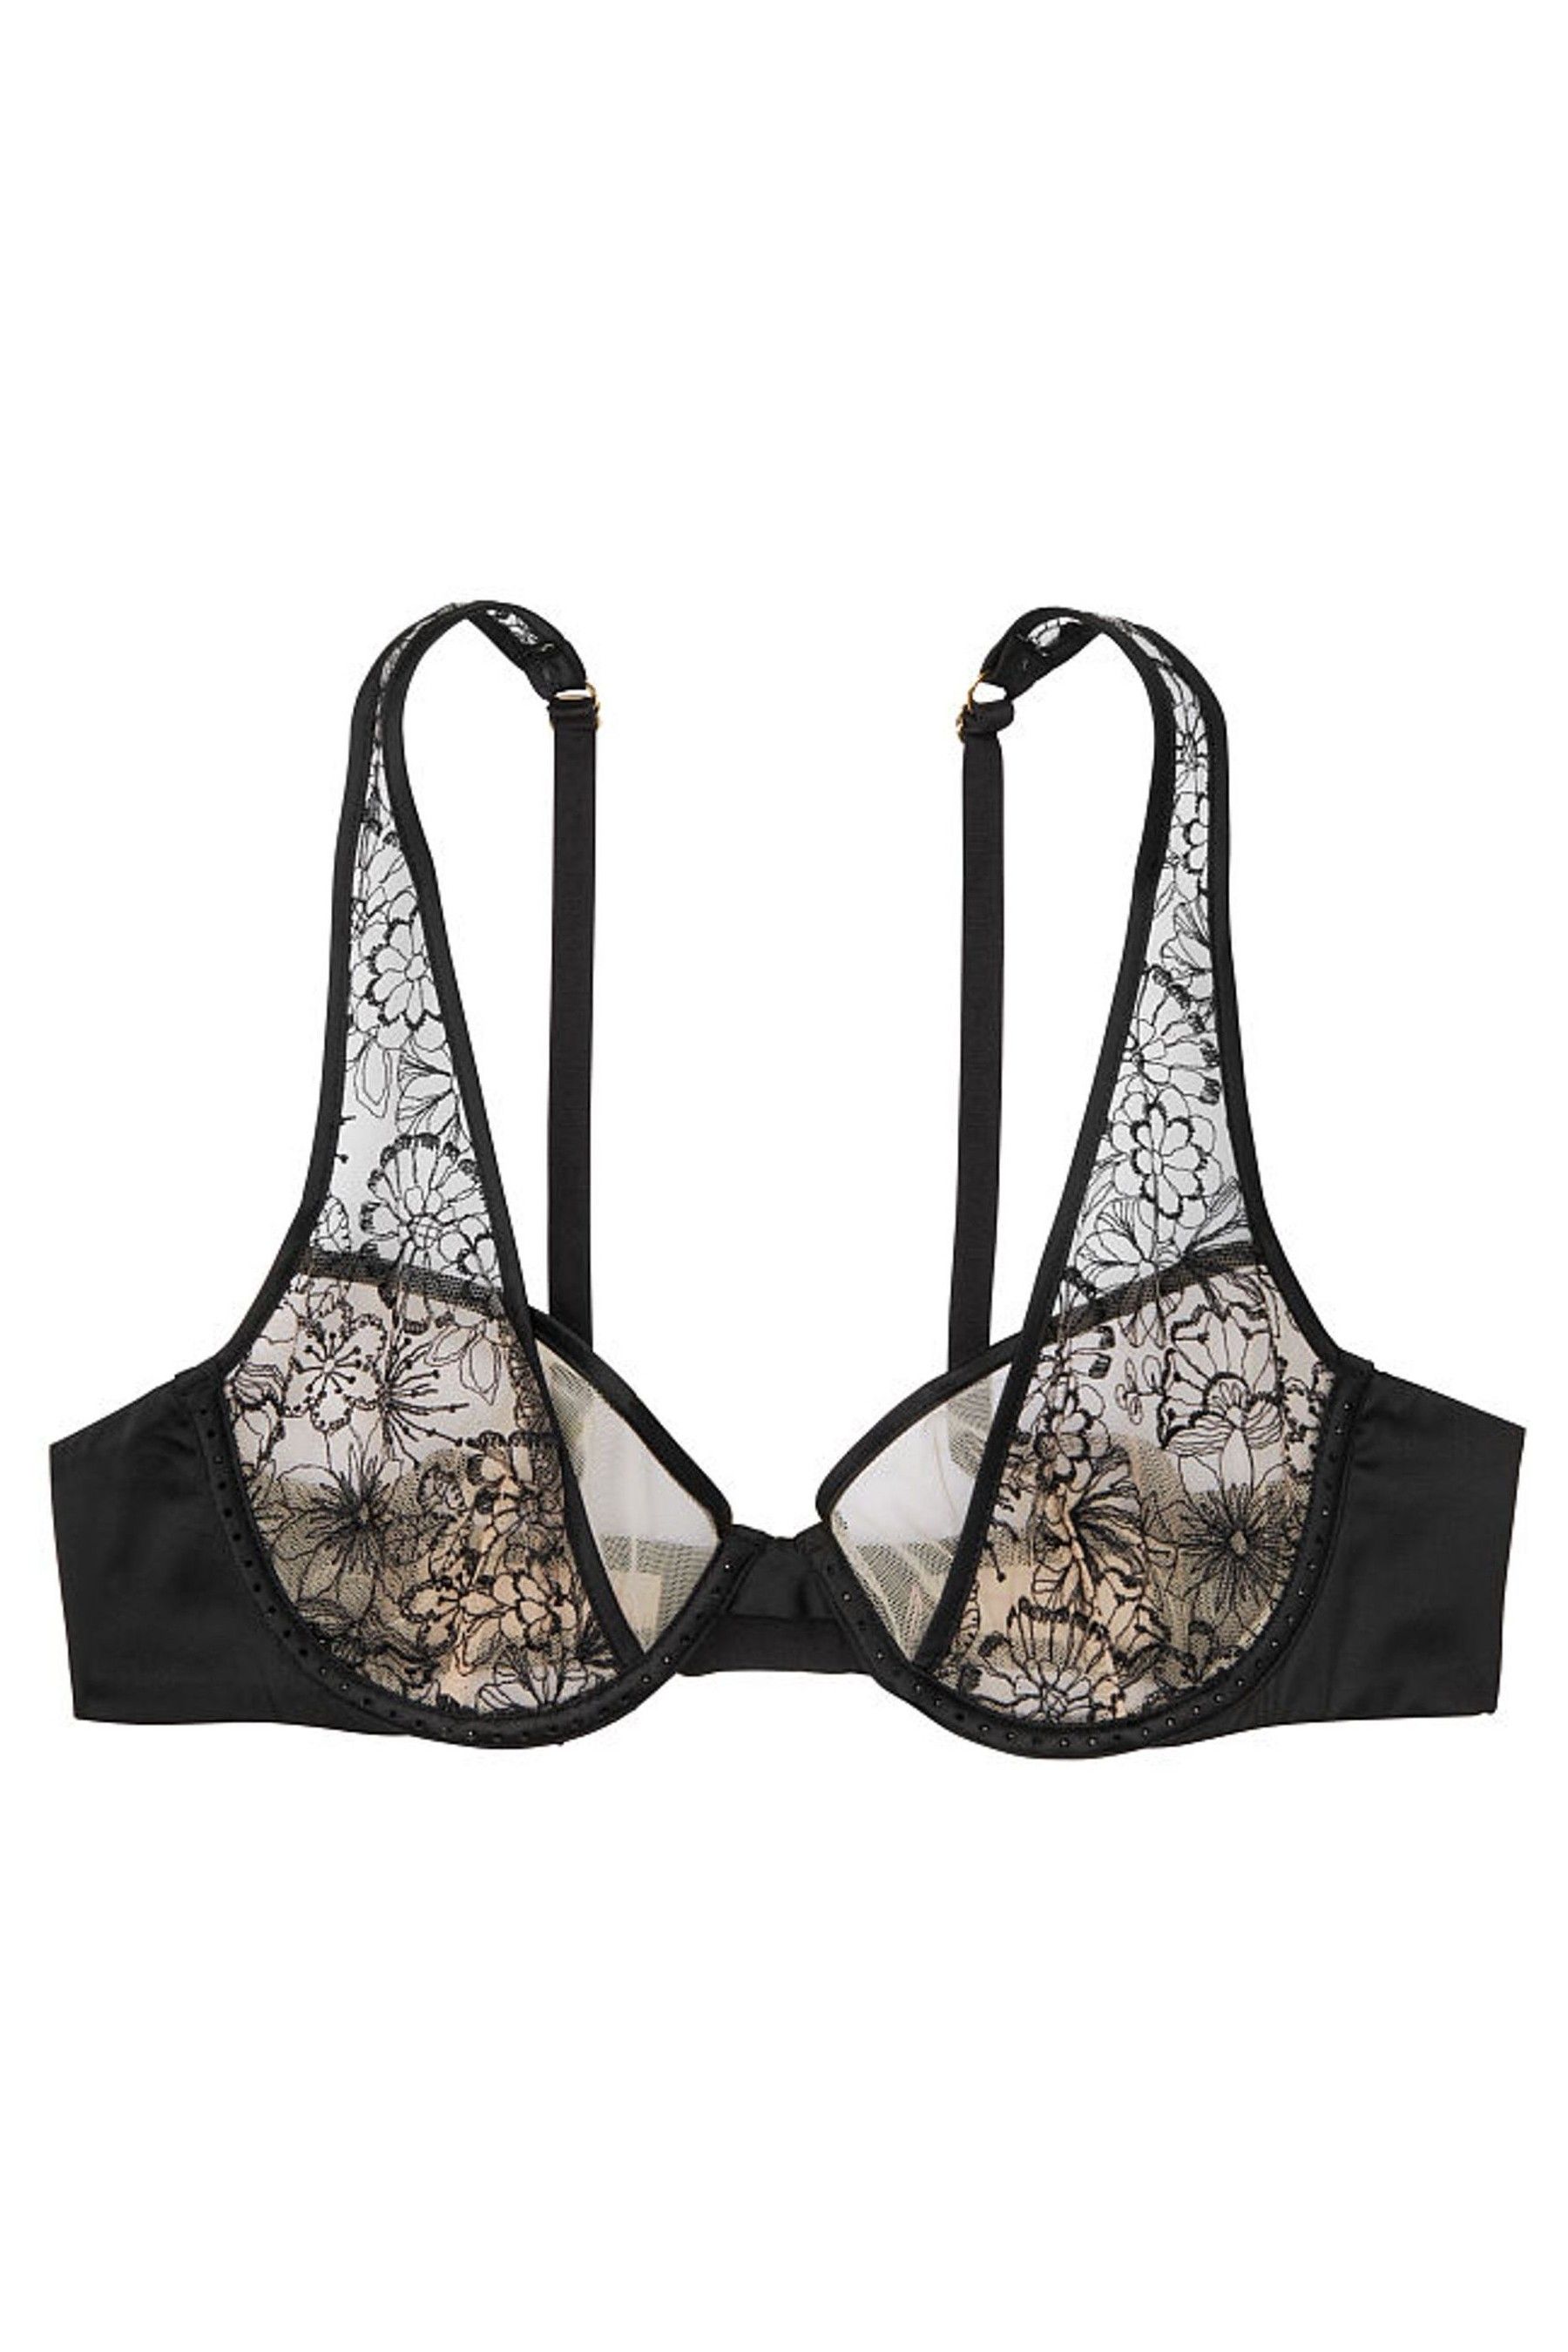 Buy Victoria's Secret Unlined Floral Embroidered Plunge Bra from the ...